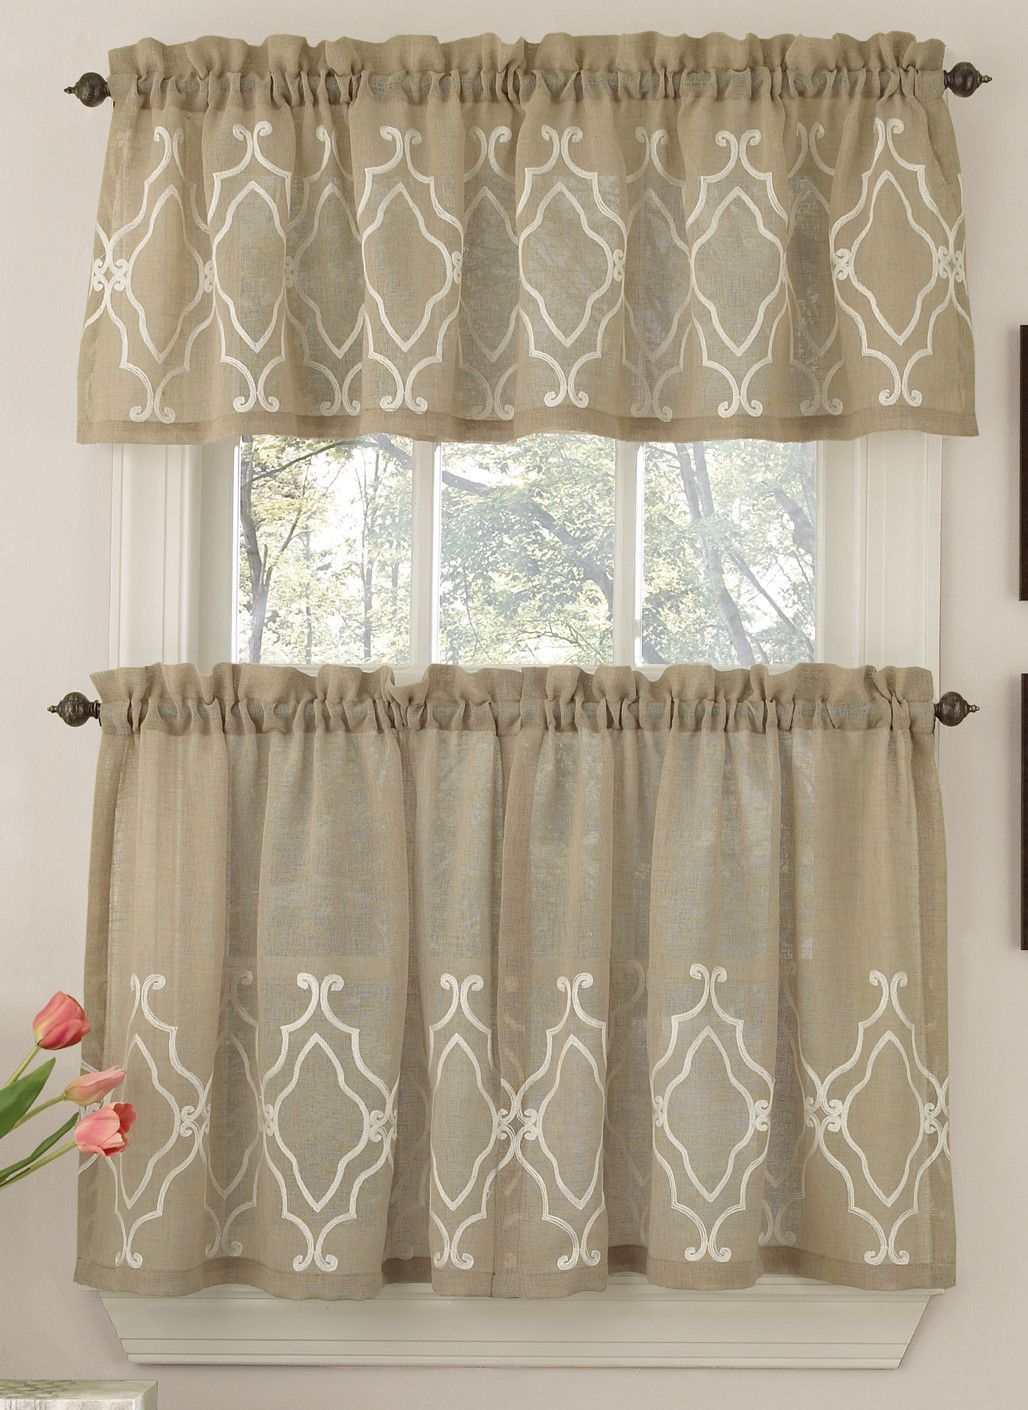 Carlyle Stitched Quatrafoil Kitchen Tier Curtains In 2019 Regarding Tailored Valance And Tier Curtains (View 8 of 20)